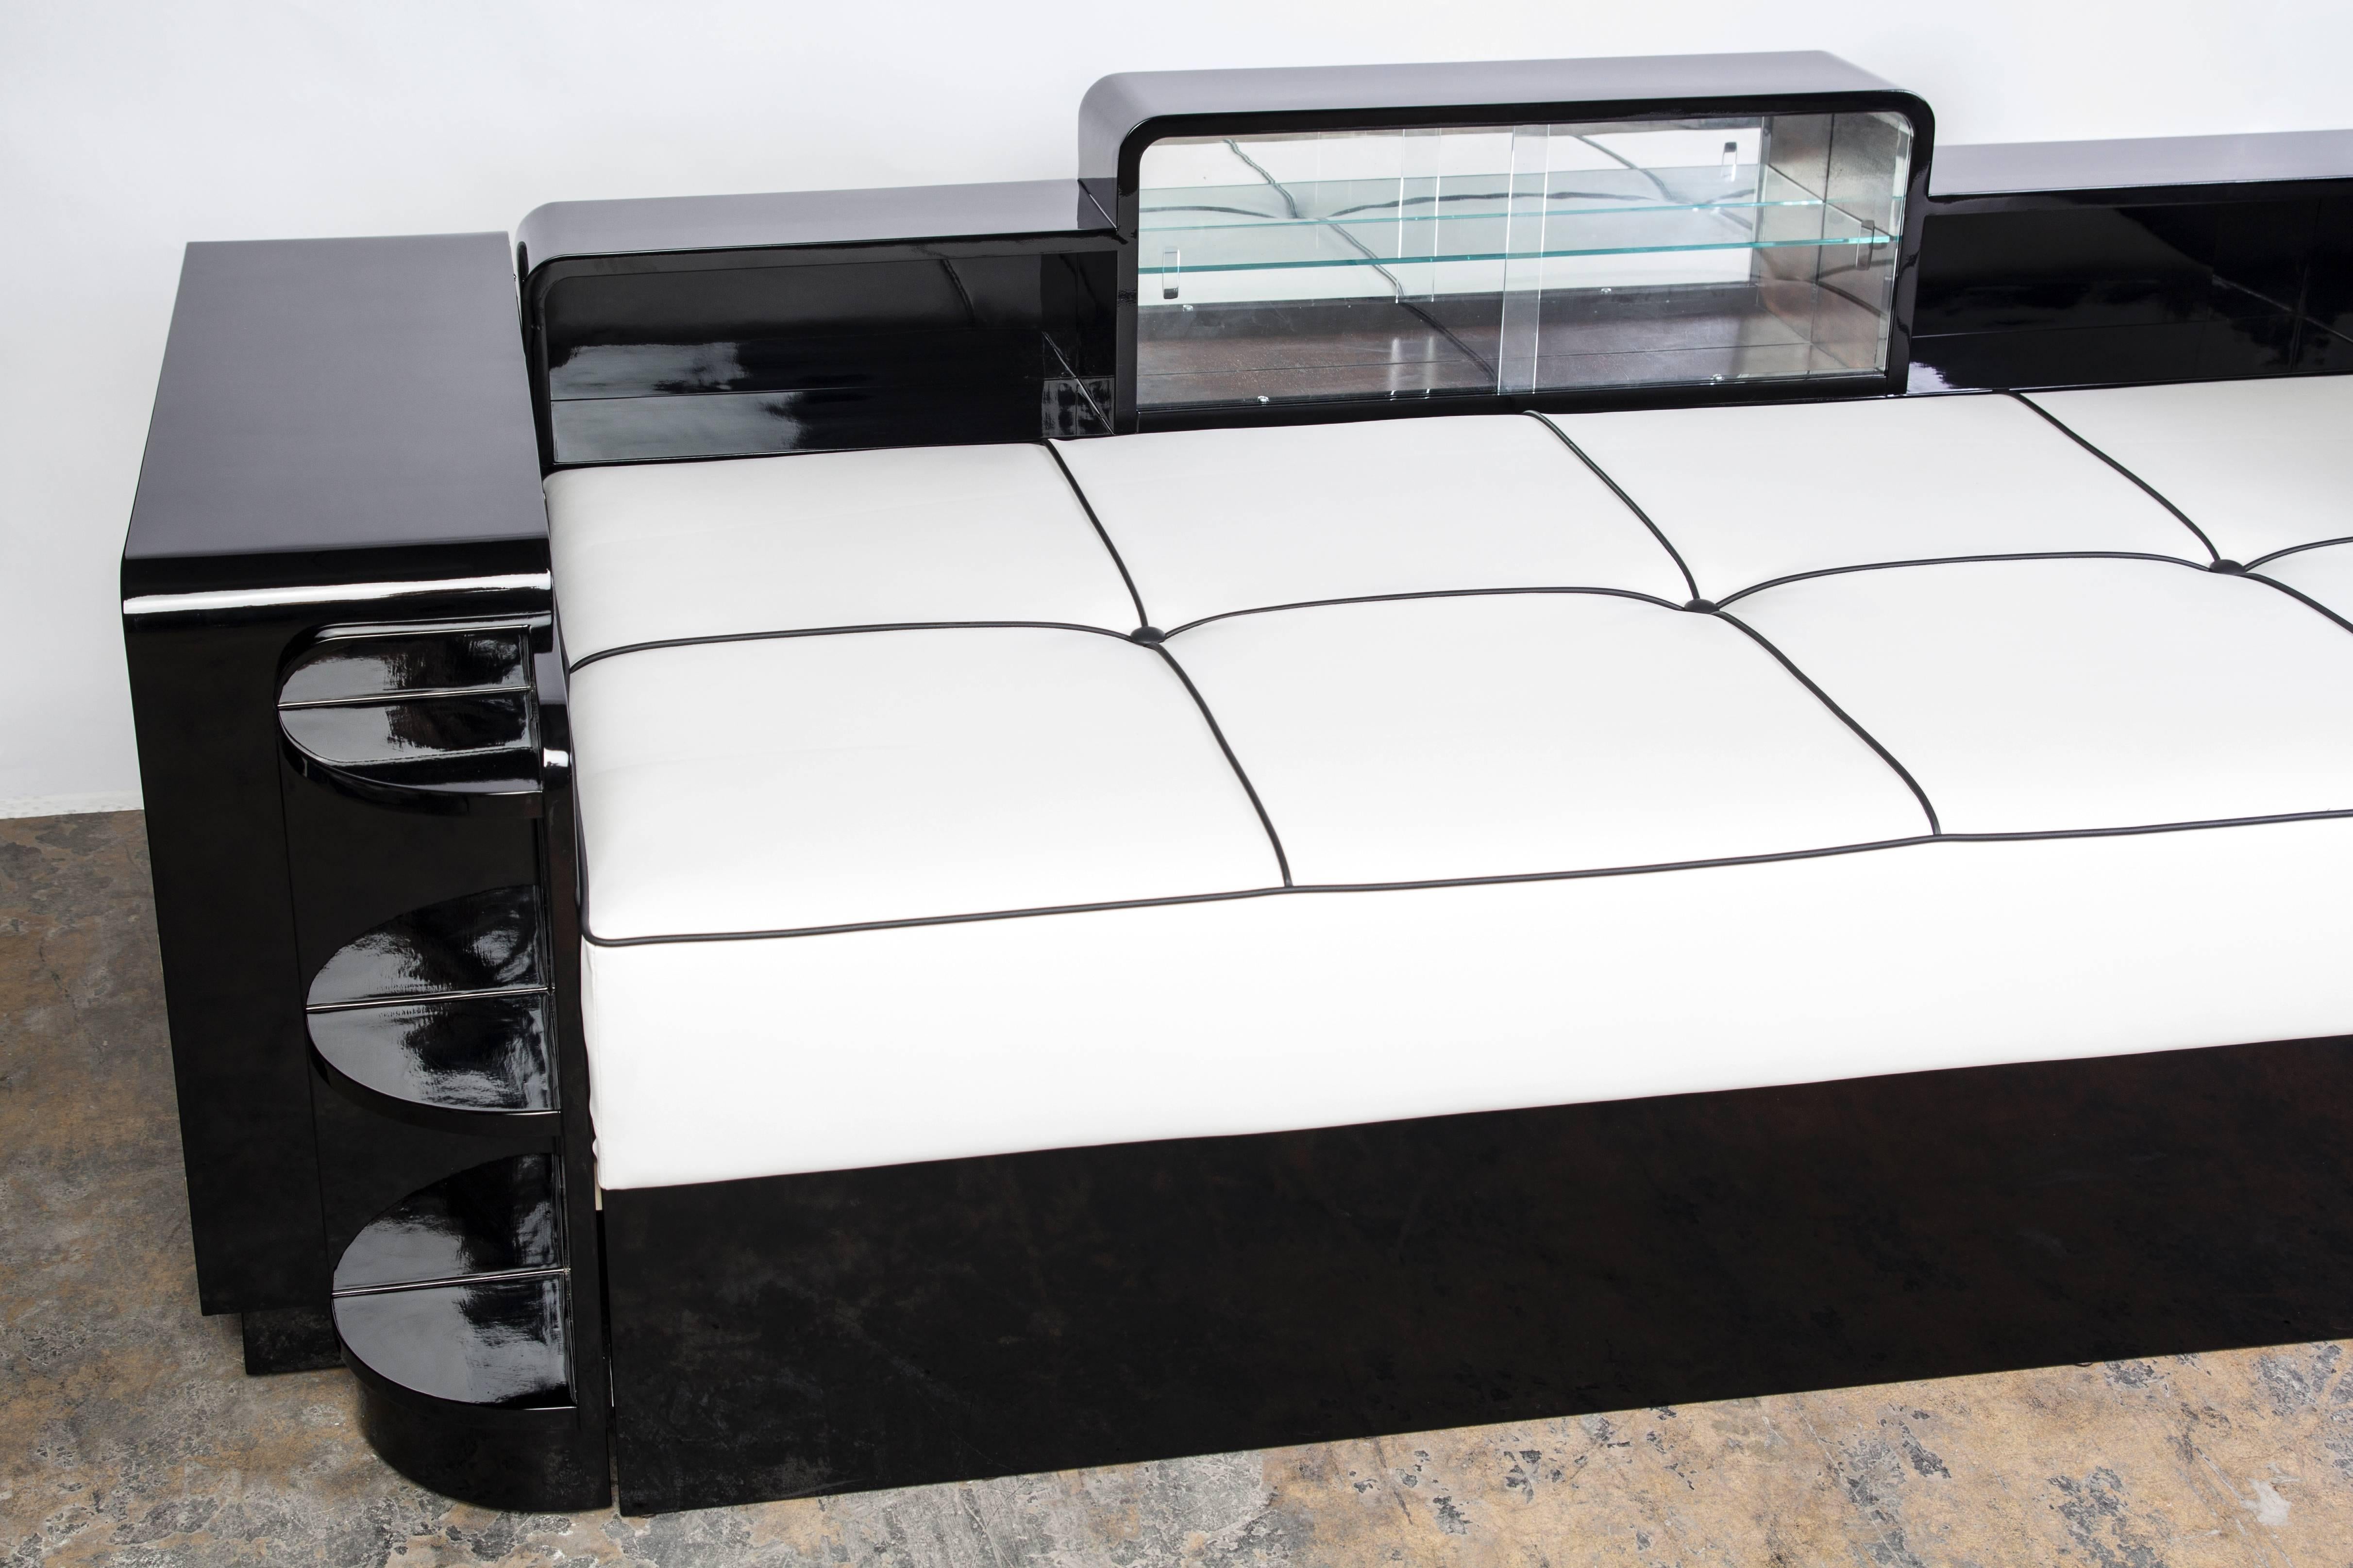 This magnificent French Art Deco daybed features an streamline design in high gloss black piano lacquer and covered with a luscious leather upholstered cushion. The piece features a display compartment with mirror back and glass shelve and doors.